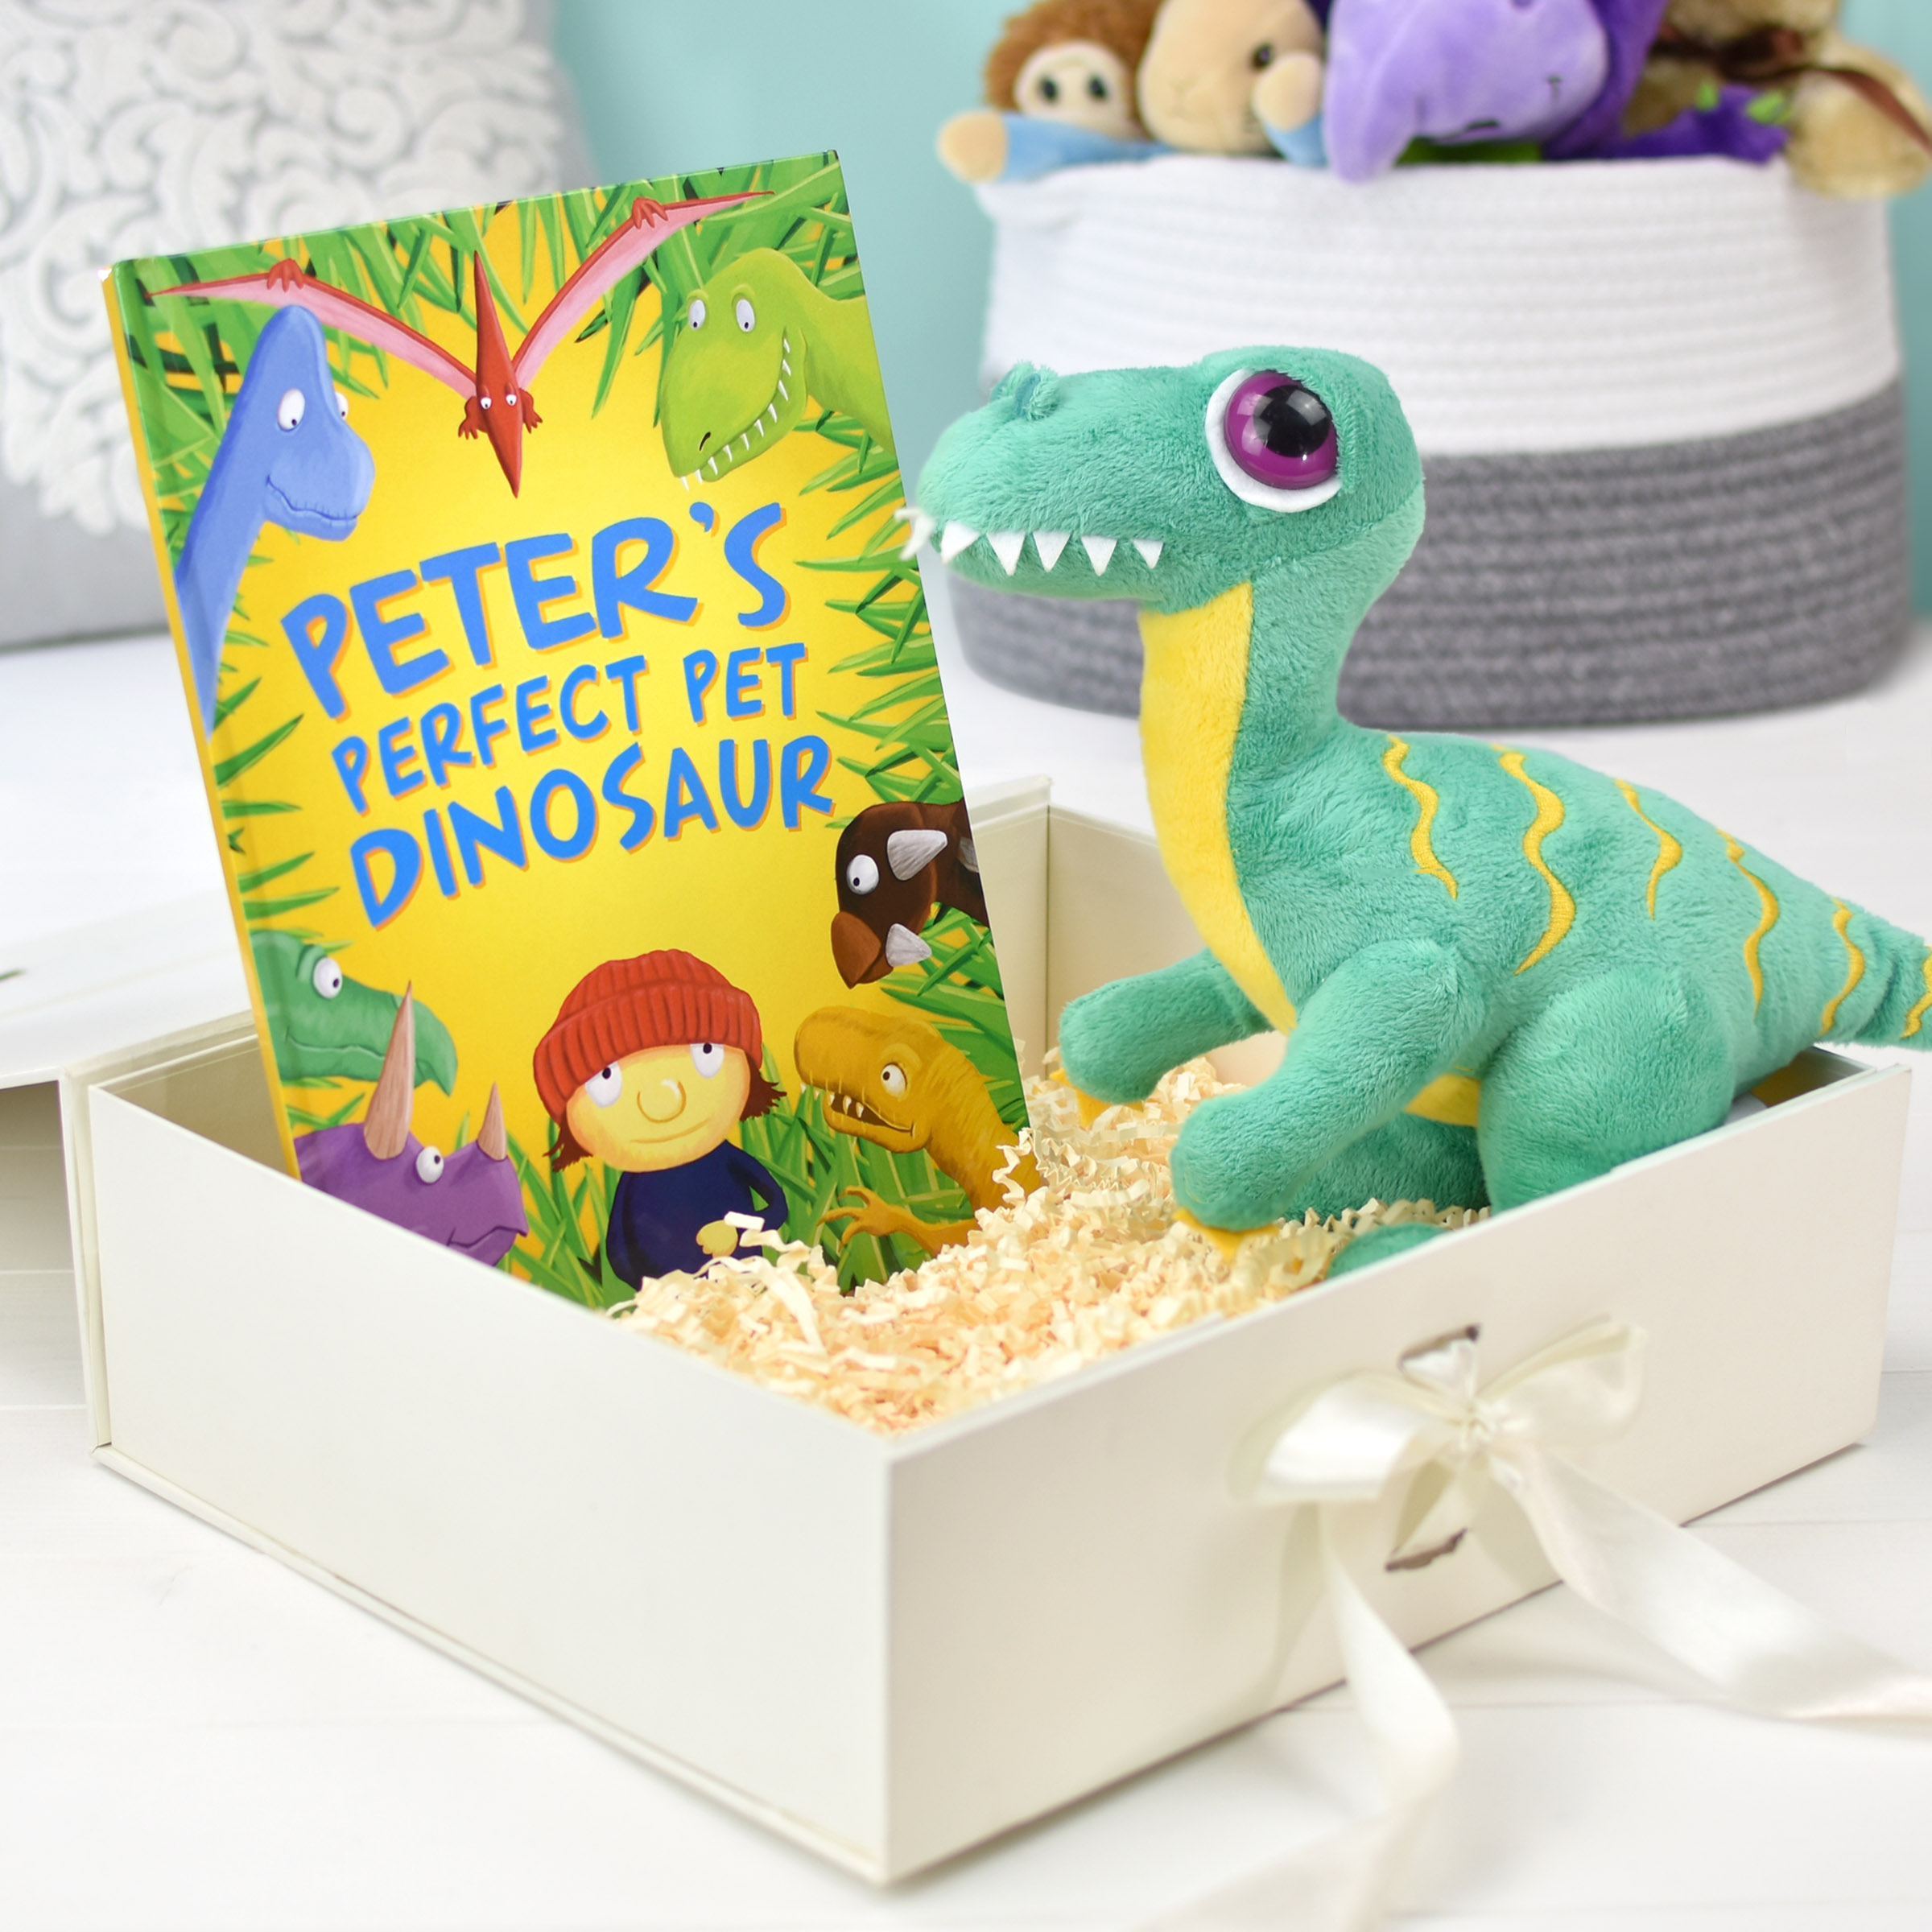 Perfect Pet Dinosaur Personalised Book and Plush Toy Giftset - Signature  Gifts